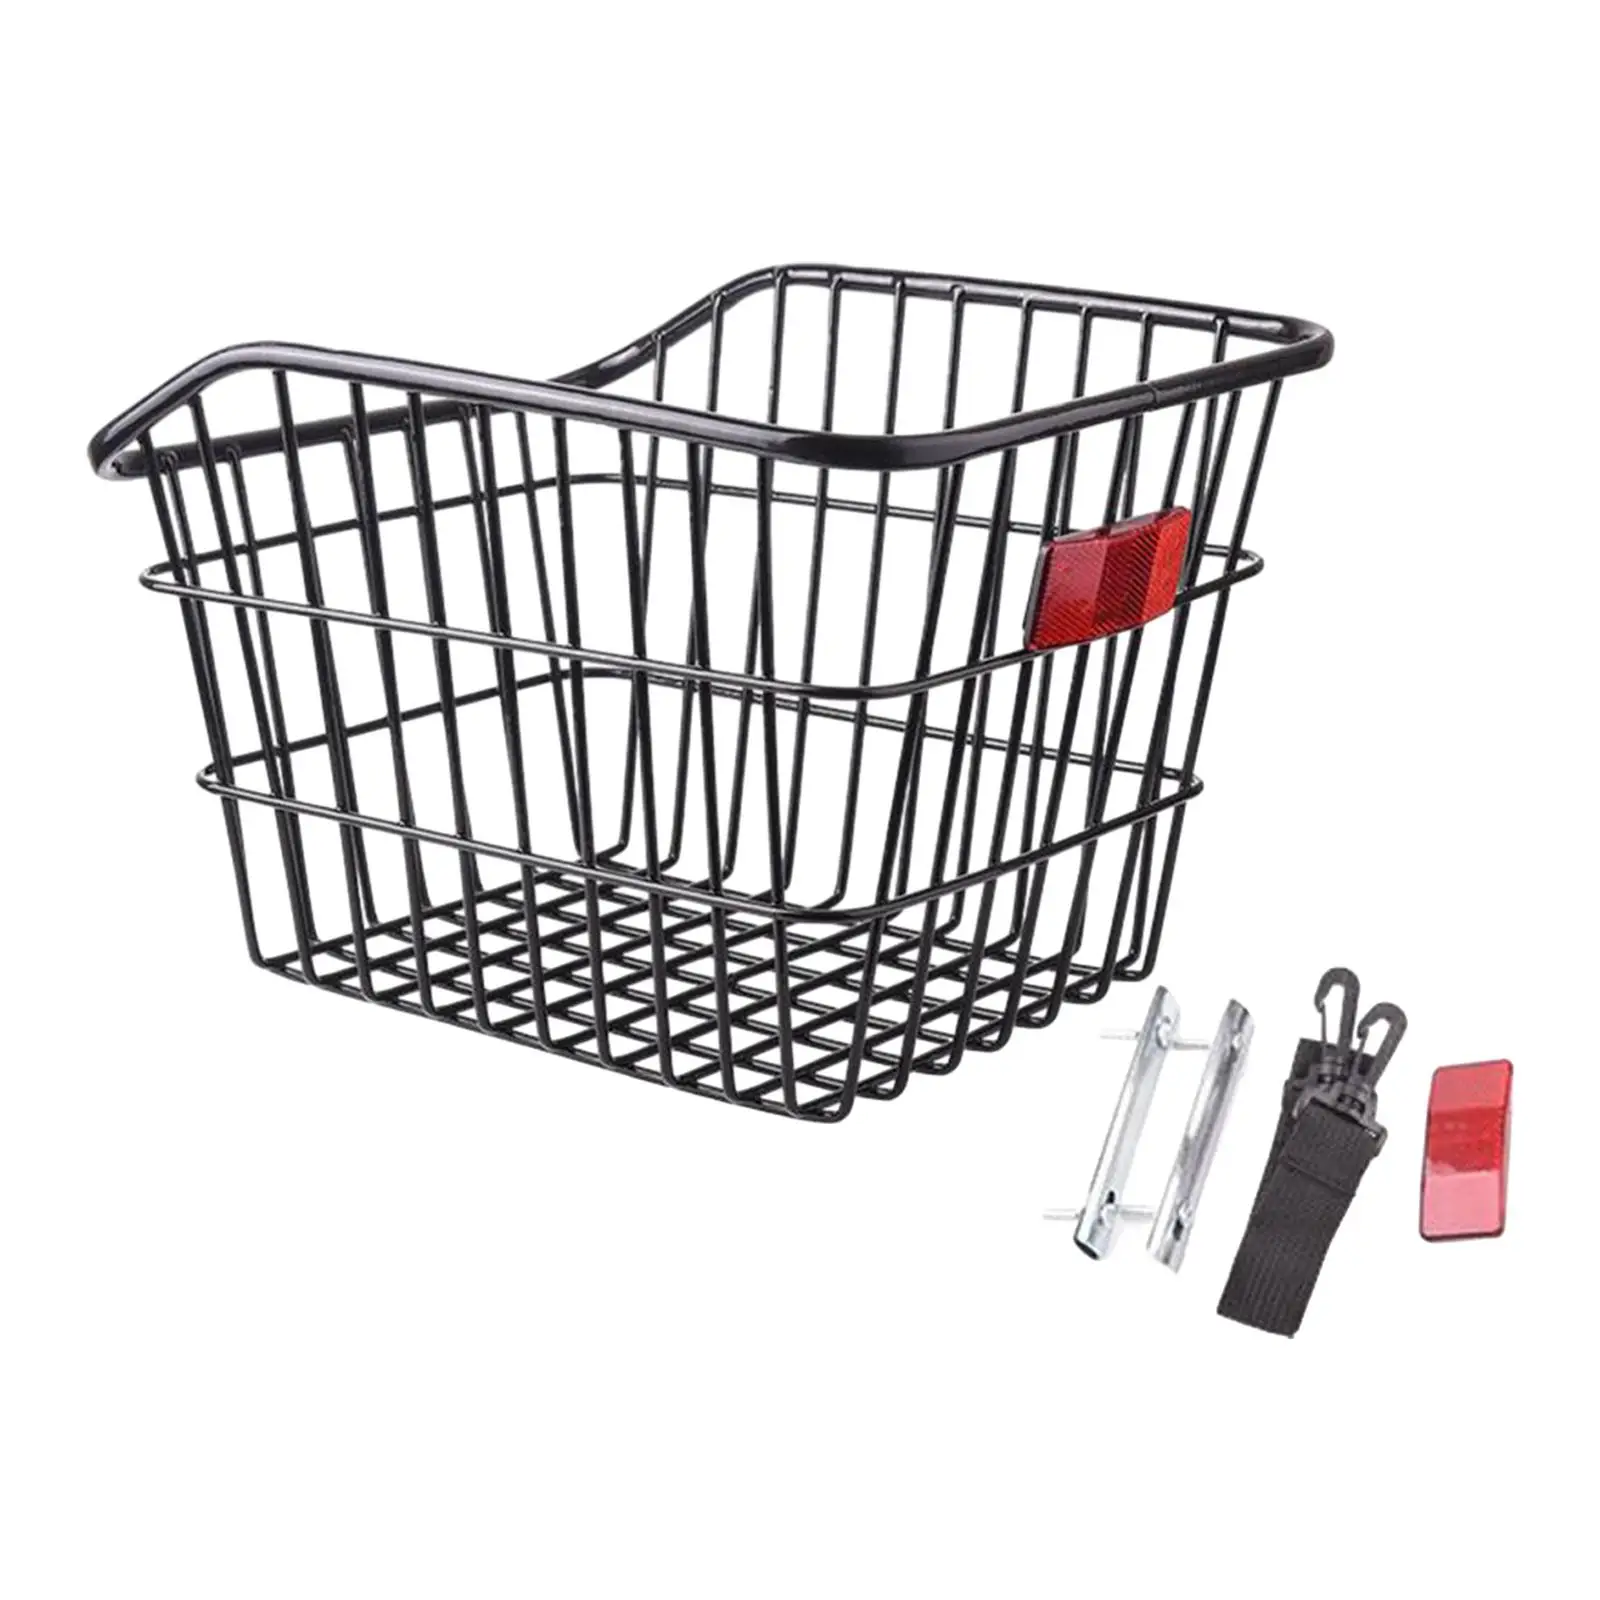 Bike Metal Wire Rear Basket without Cover Sturdy Convenient Assemble Universal Accessory Strengthened Frame for Mountain Bikes